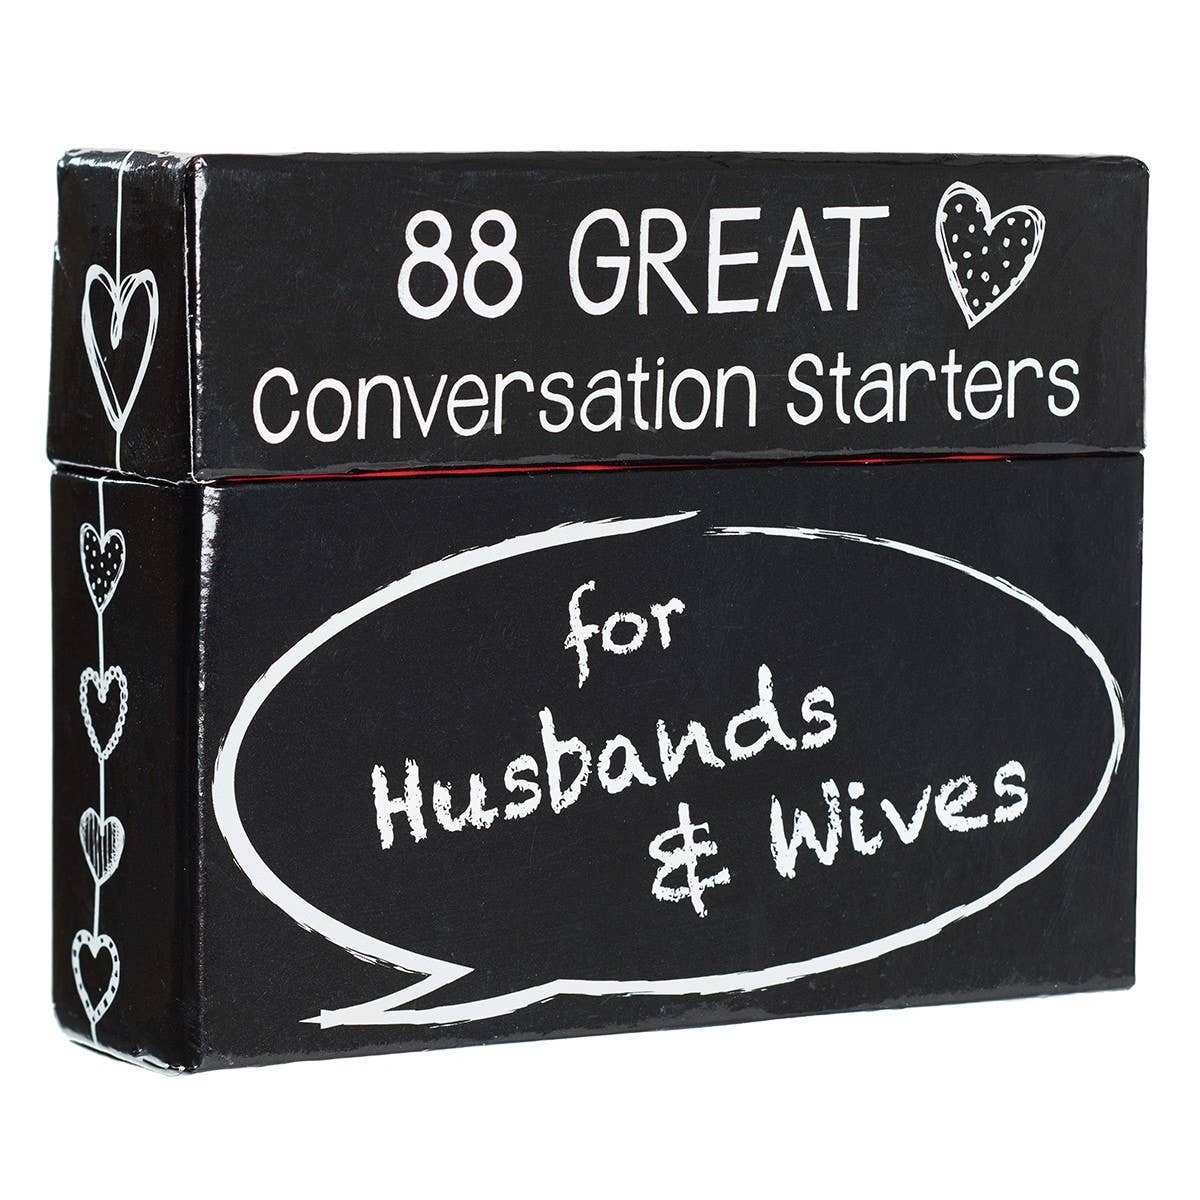 88 Great Conversation Starters For Husbands & Wives